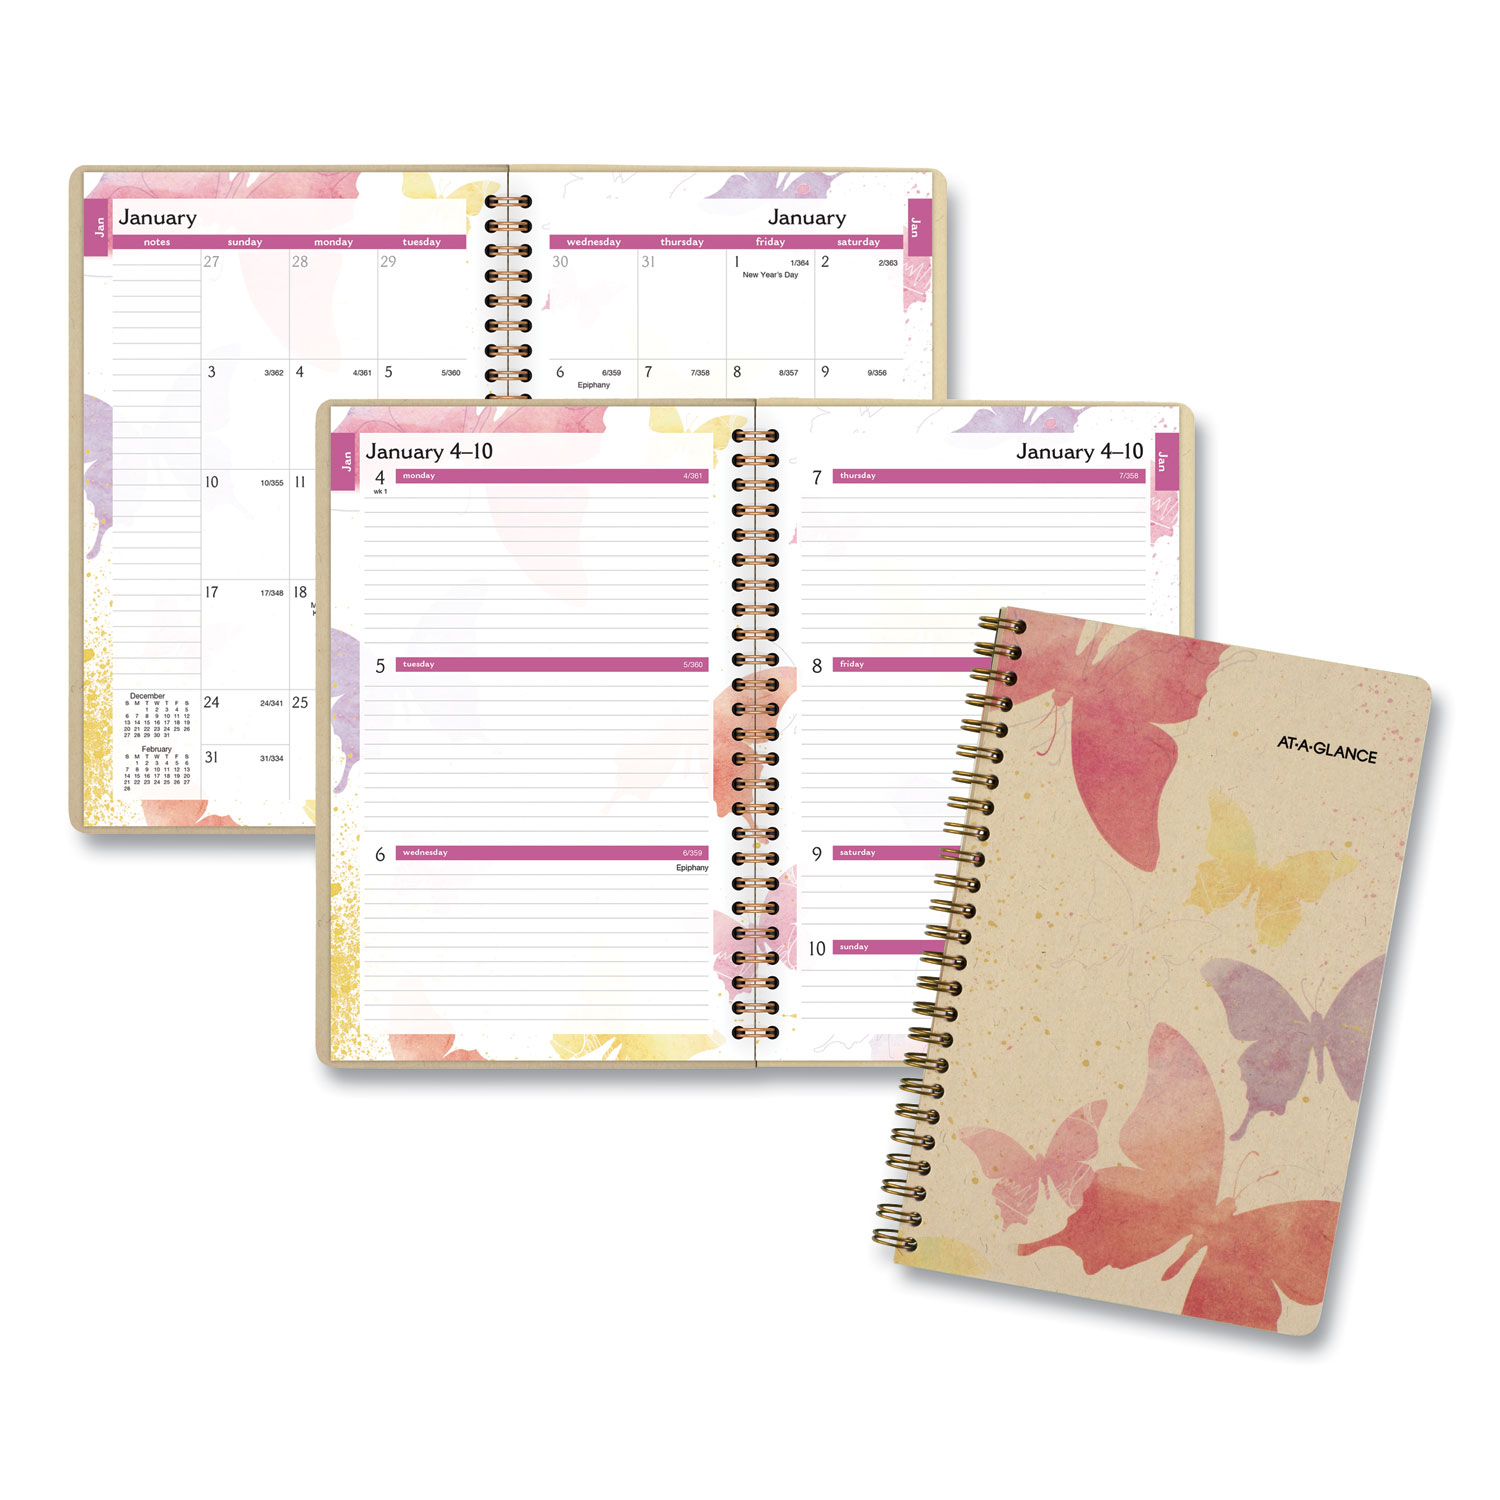  AT-A-GLANCE 791-200G Watercolors Weekly/Monthly Planner, 8 1/2 x 5 1/2, Watercolors, 2020 (AAG791200G) 